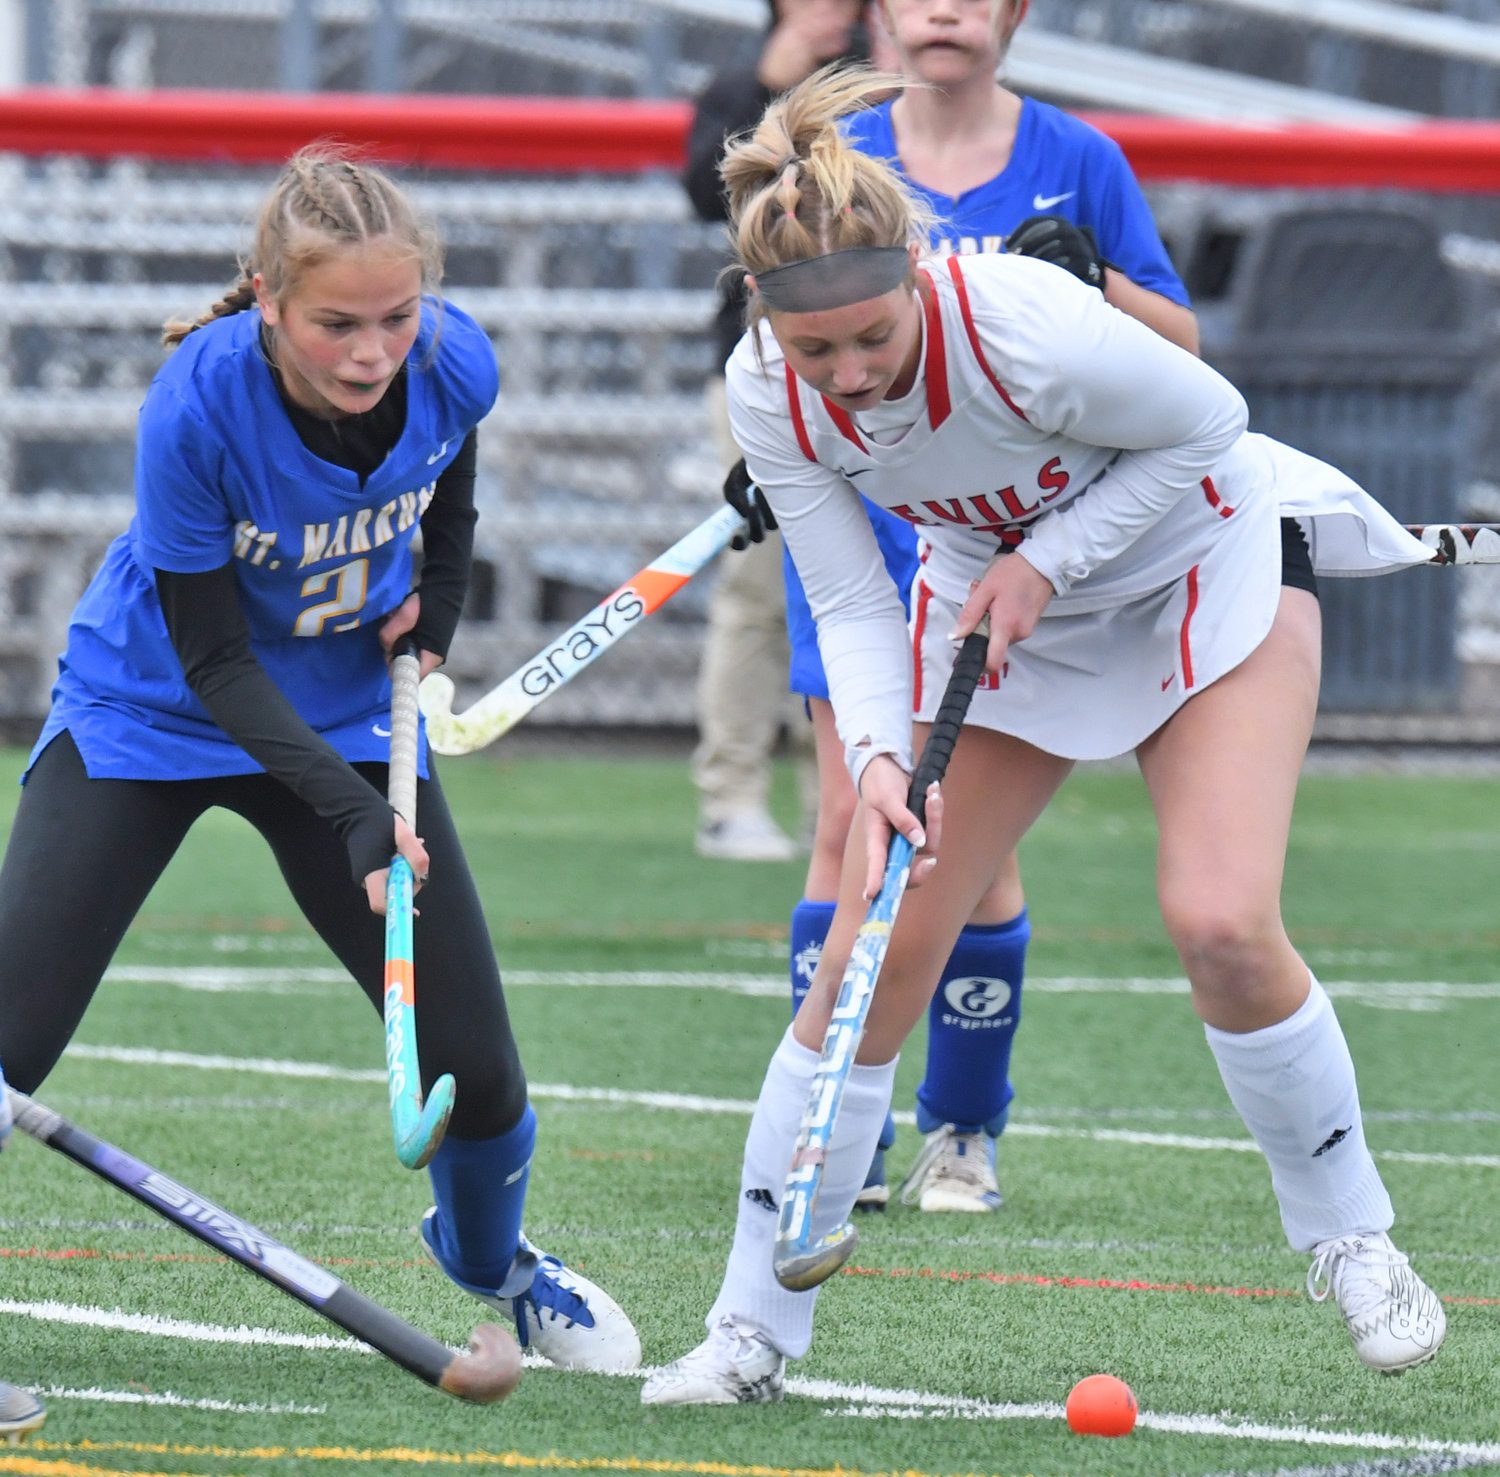 Vernon-Verona-Sherrill's Carmella Garcia, right, controls the ball in front of Mount Markham's Haley Otis in the first quarter of the teams' Section III Class C quarterfinal game in VVS. Garcia scored two first half goals and the Red Devils won 3-0. Details were not available at press time.